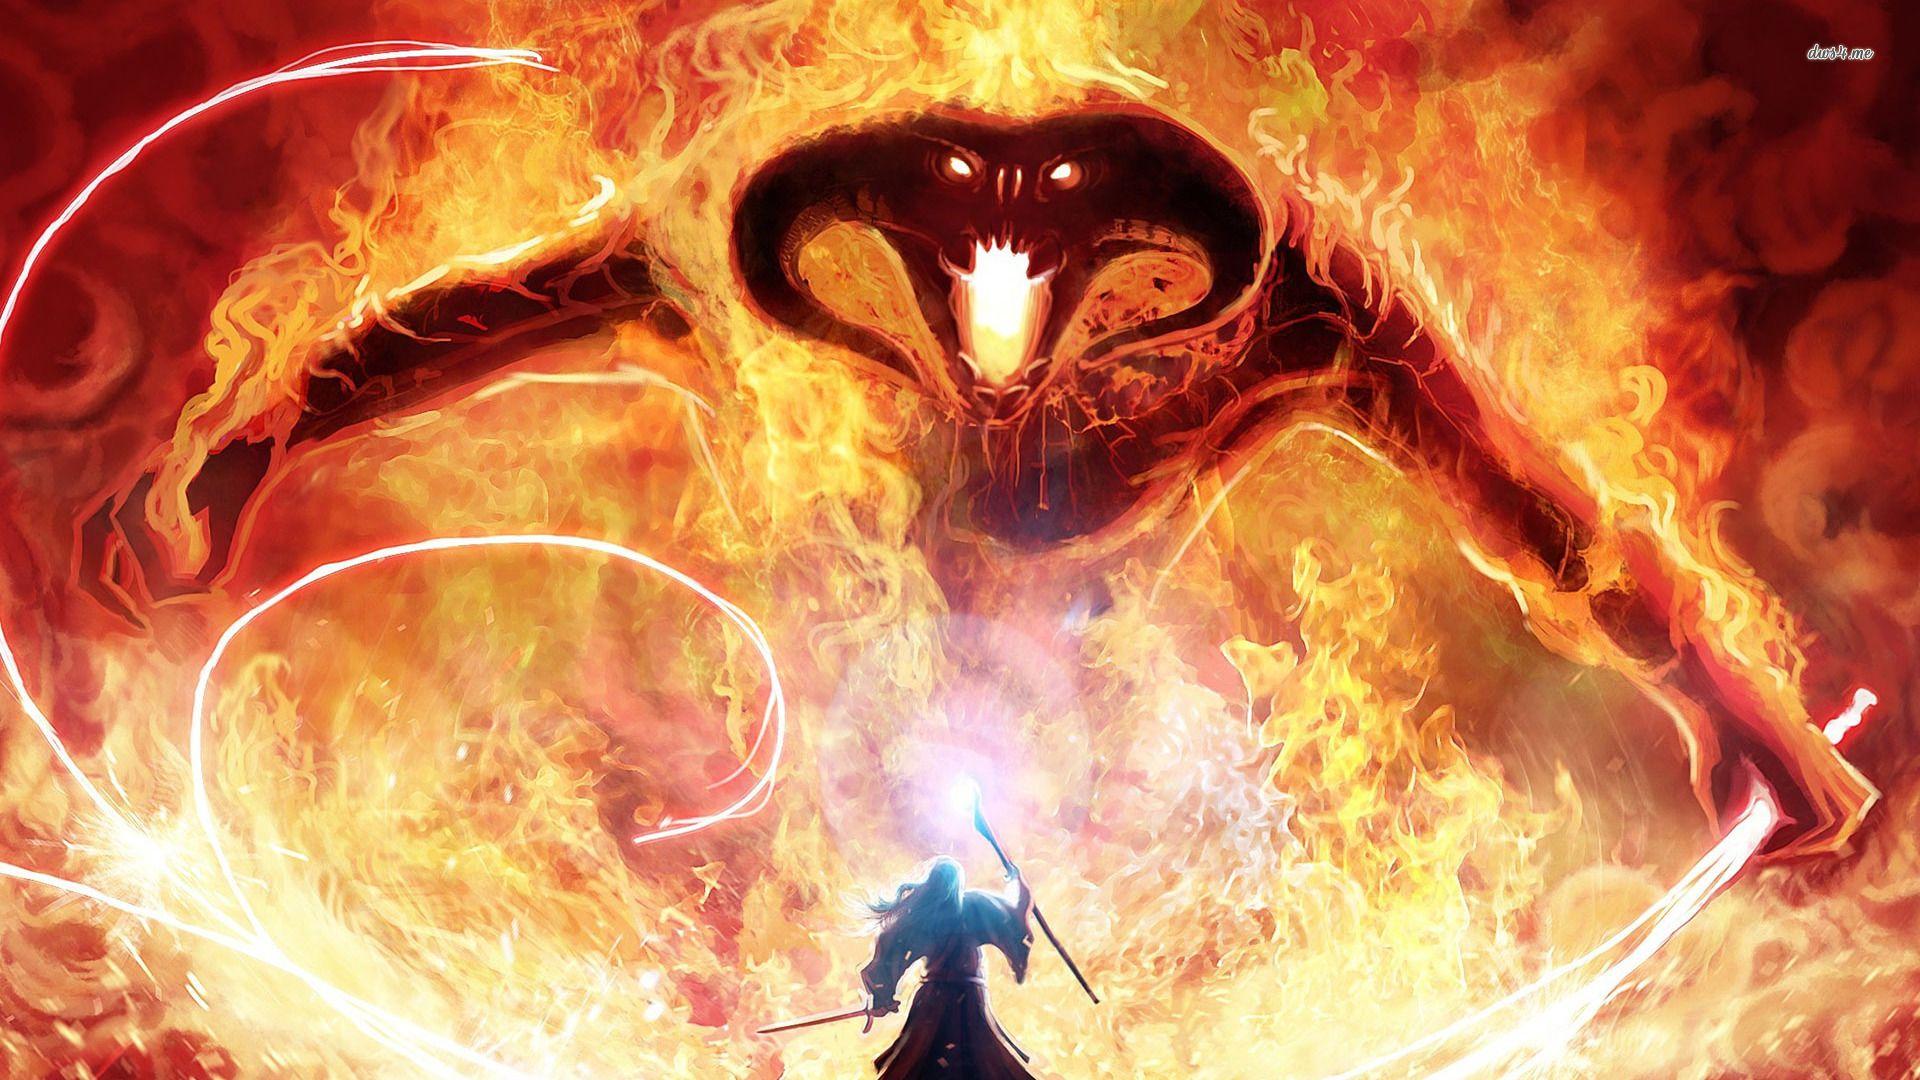 gandalf and balrog lord of the rings 1920x1080 movie wallpaper